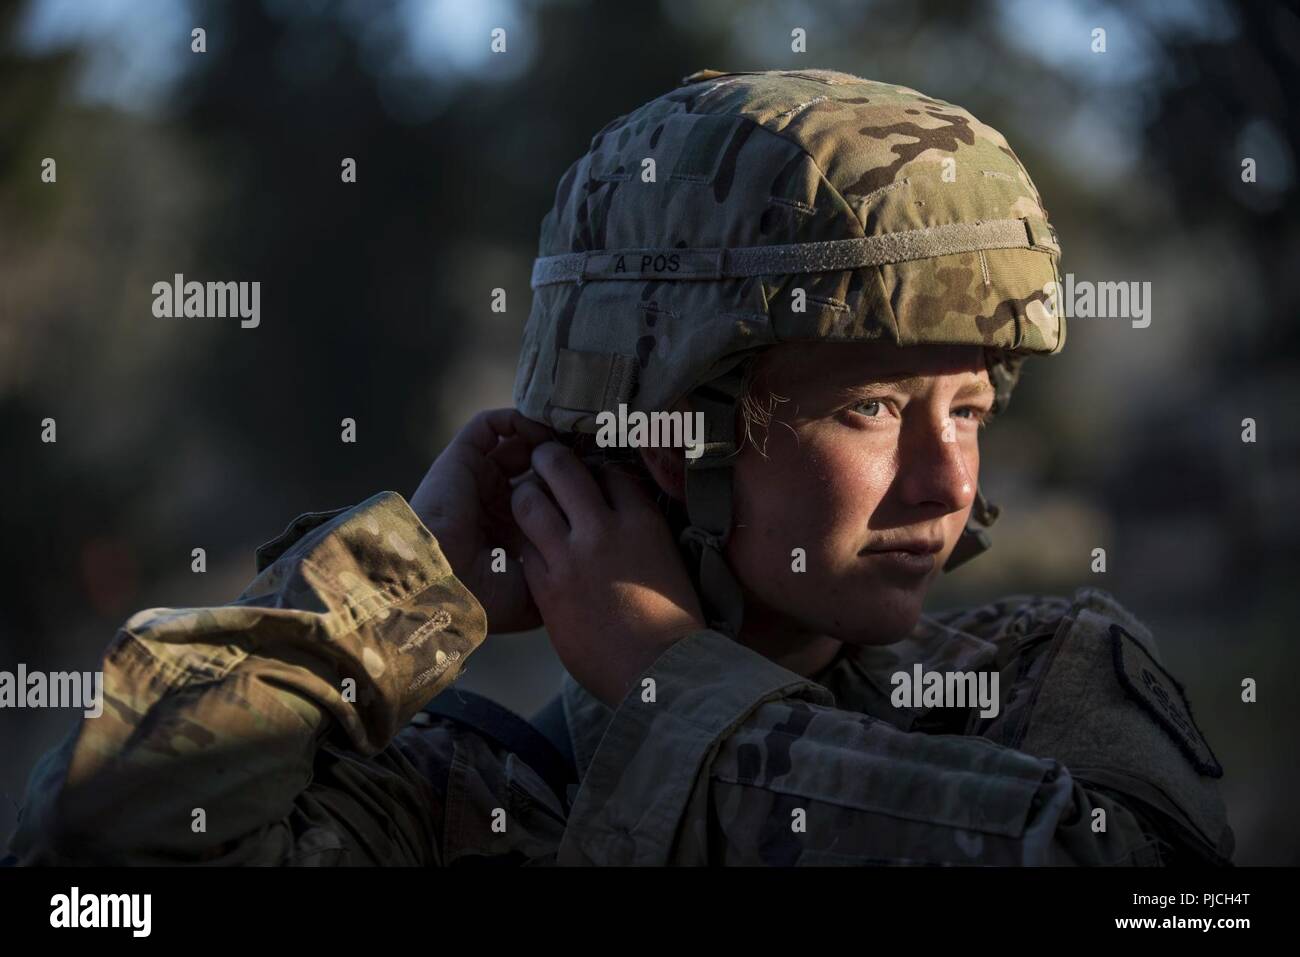 Sgt. Brooke Prigg, a U.S. Army Reserve satellite operator and maintainer with Alpha Company, 98th Expeditionary Signal Battalion, headquartered in Denver, Colorado, adjusts her helmet while training at a Combat Support Training Exercise (CSTX) at Fort Hunter Liggett, California, July 20, 2018. The signal company supported the 11th Military Police Brigade during the exercise, in which military police are responsible for a Theater Detention Facility to processes and secure up to 4,000 enemy prisoners of war and also manage a Detention Holding Area to house displaced civilians. Military police ha Stock Photo